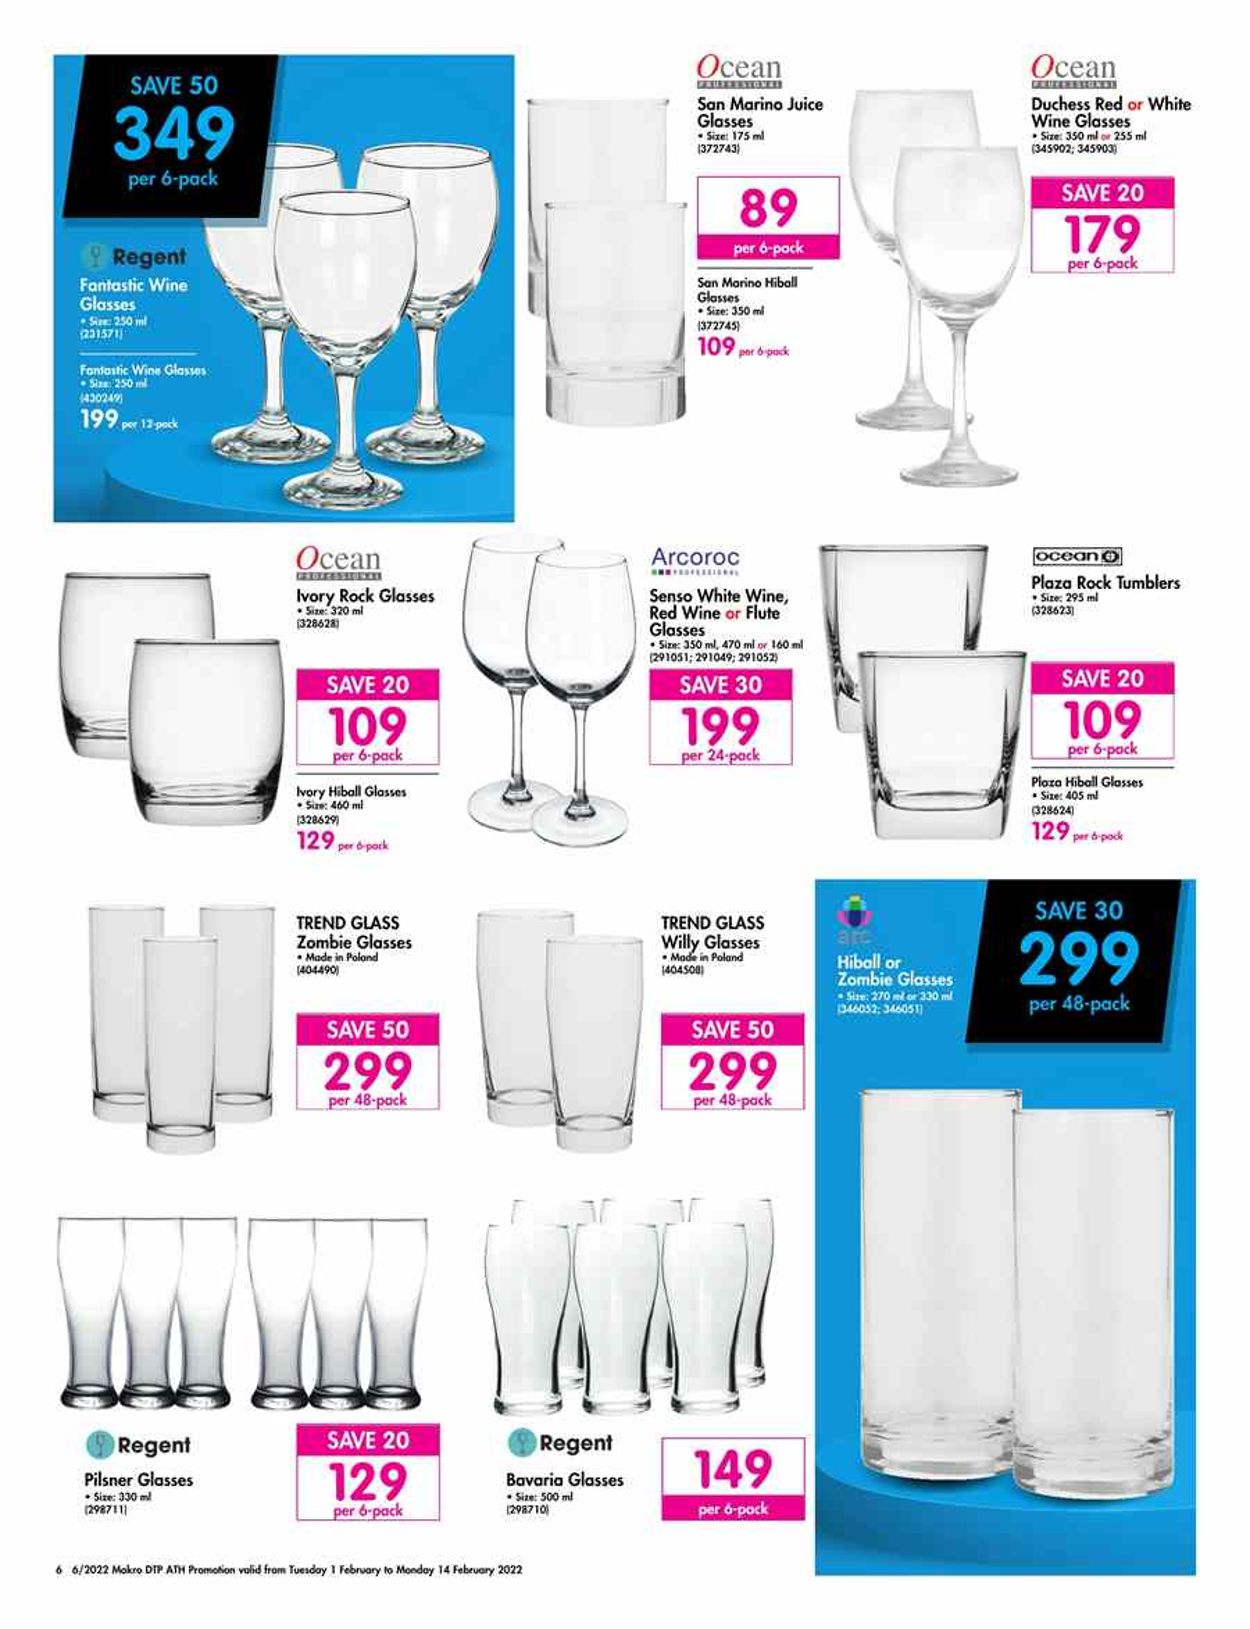 Makro Catalogue from 2022/02/01